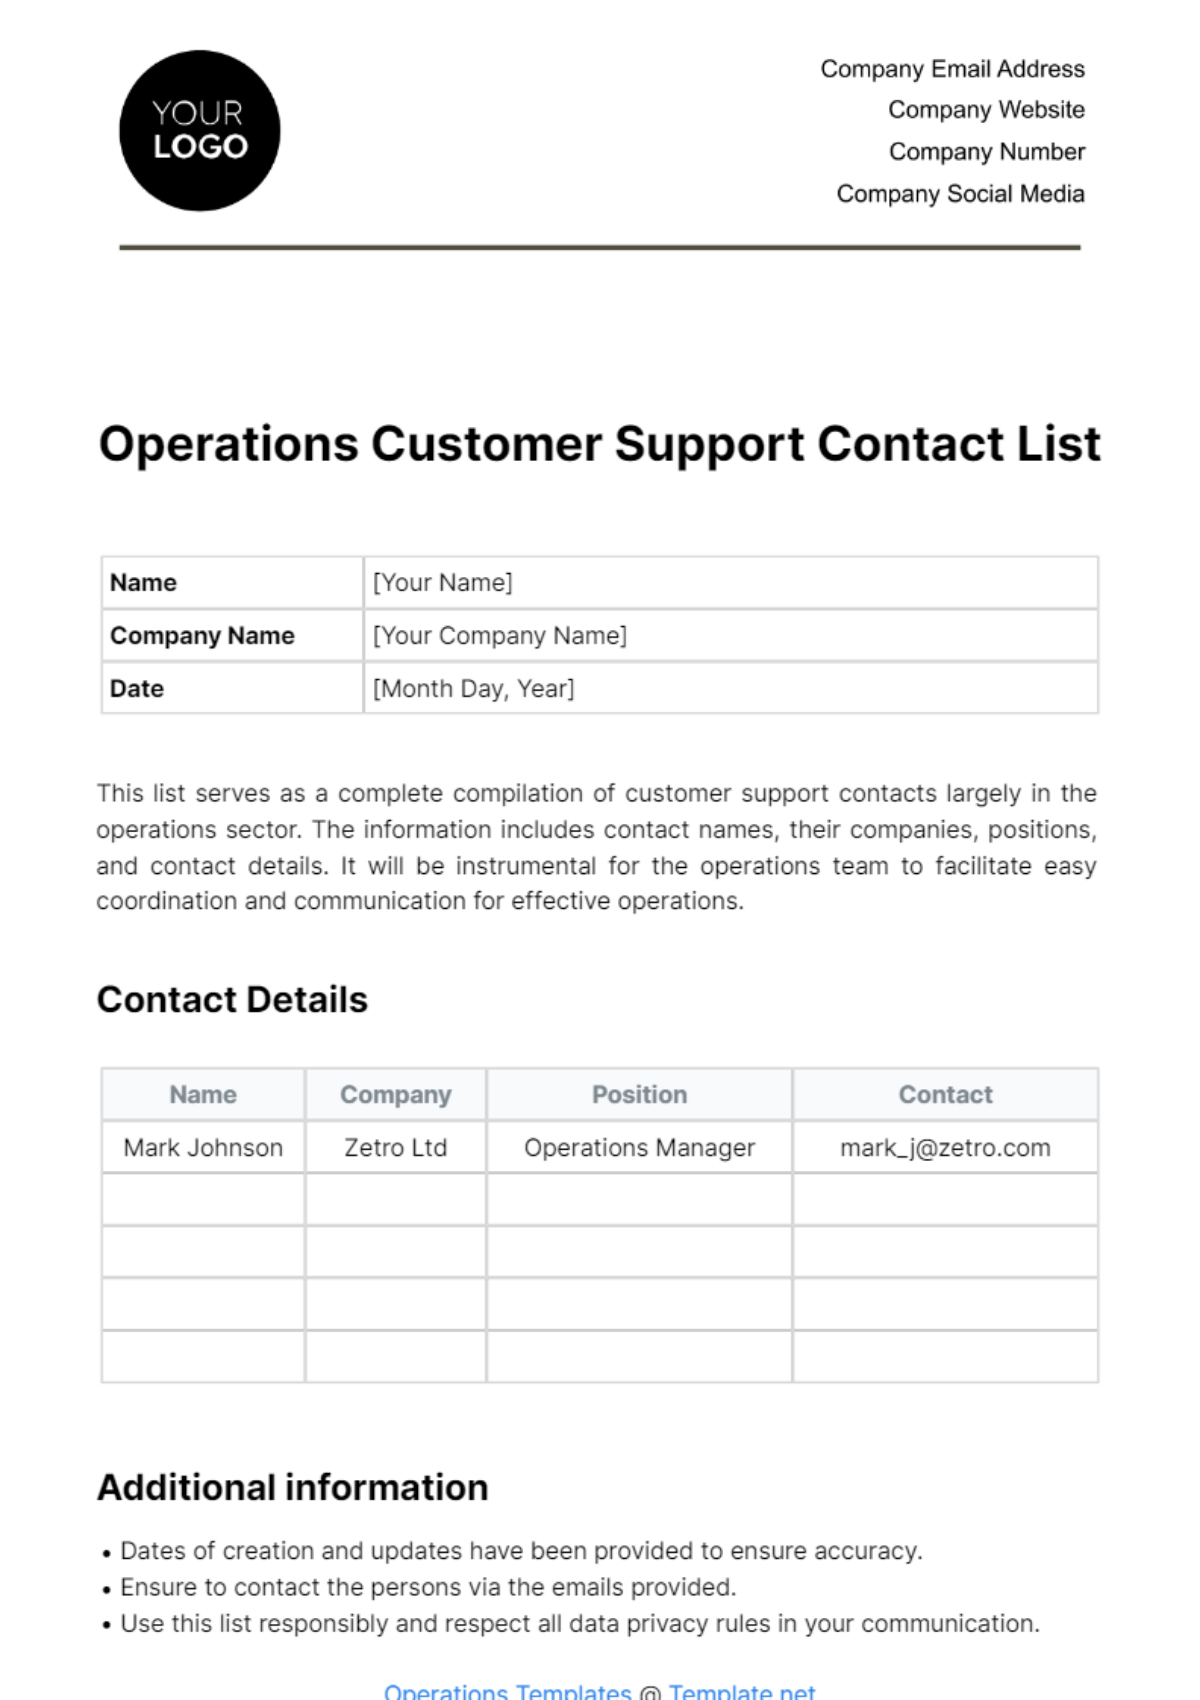 Operations Customer Support Contact List Template